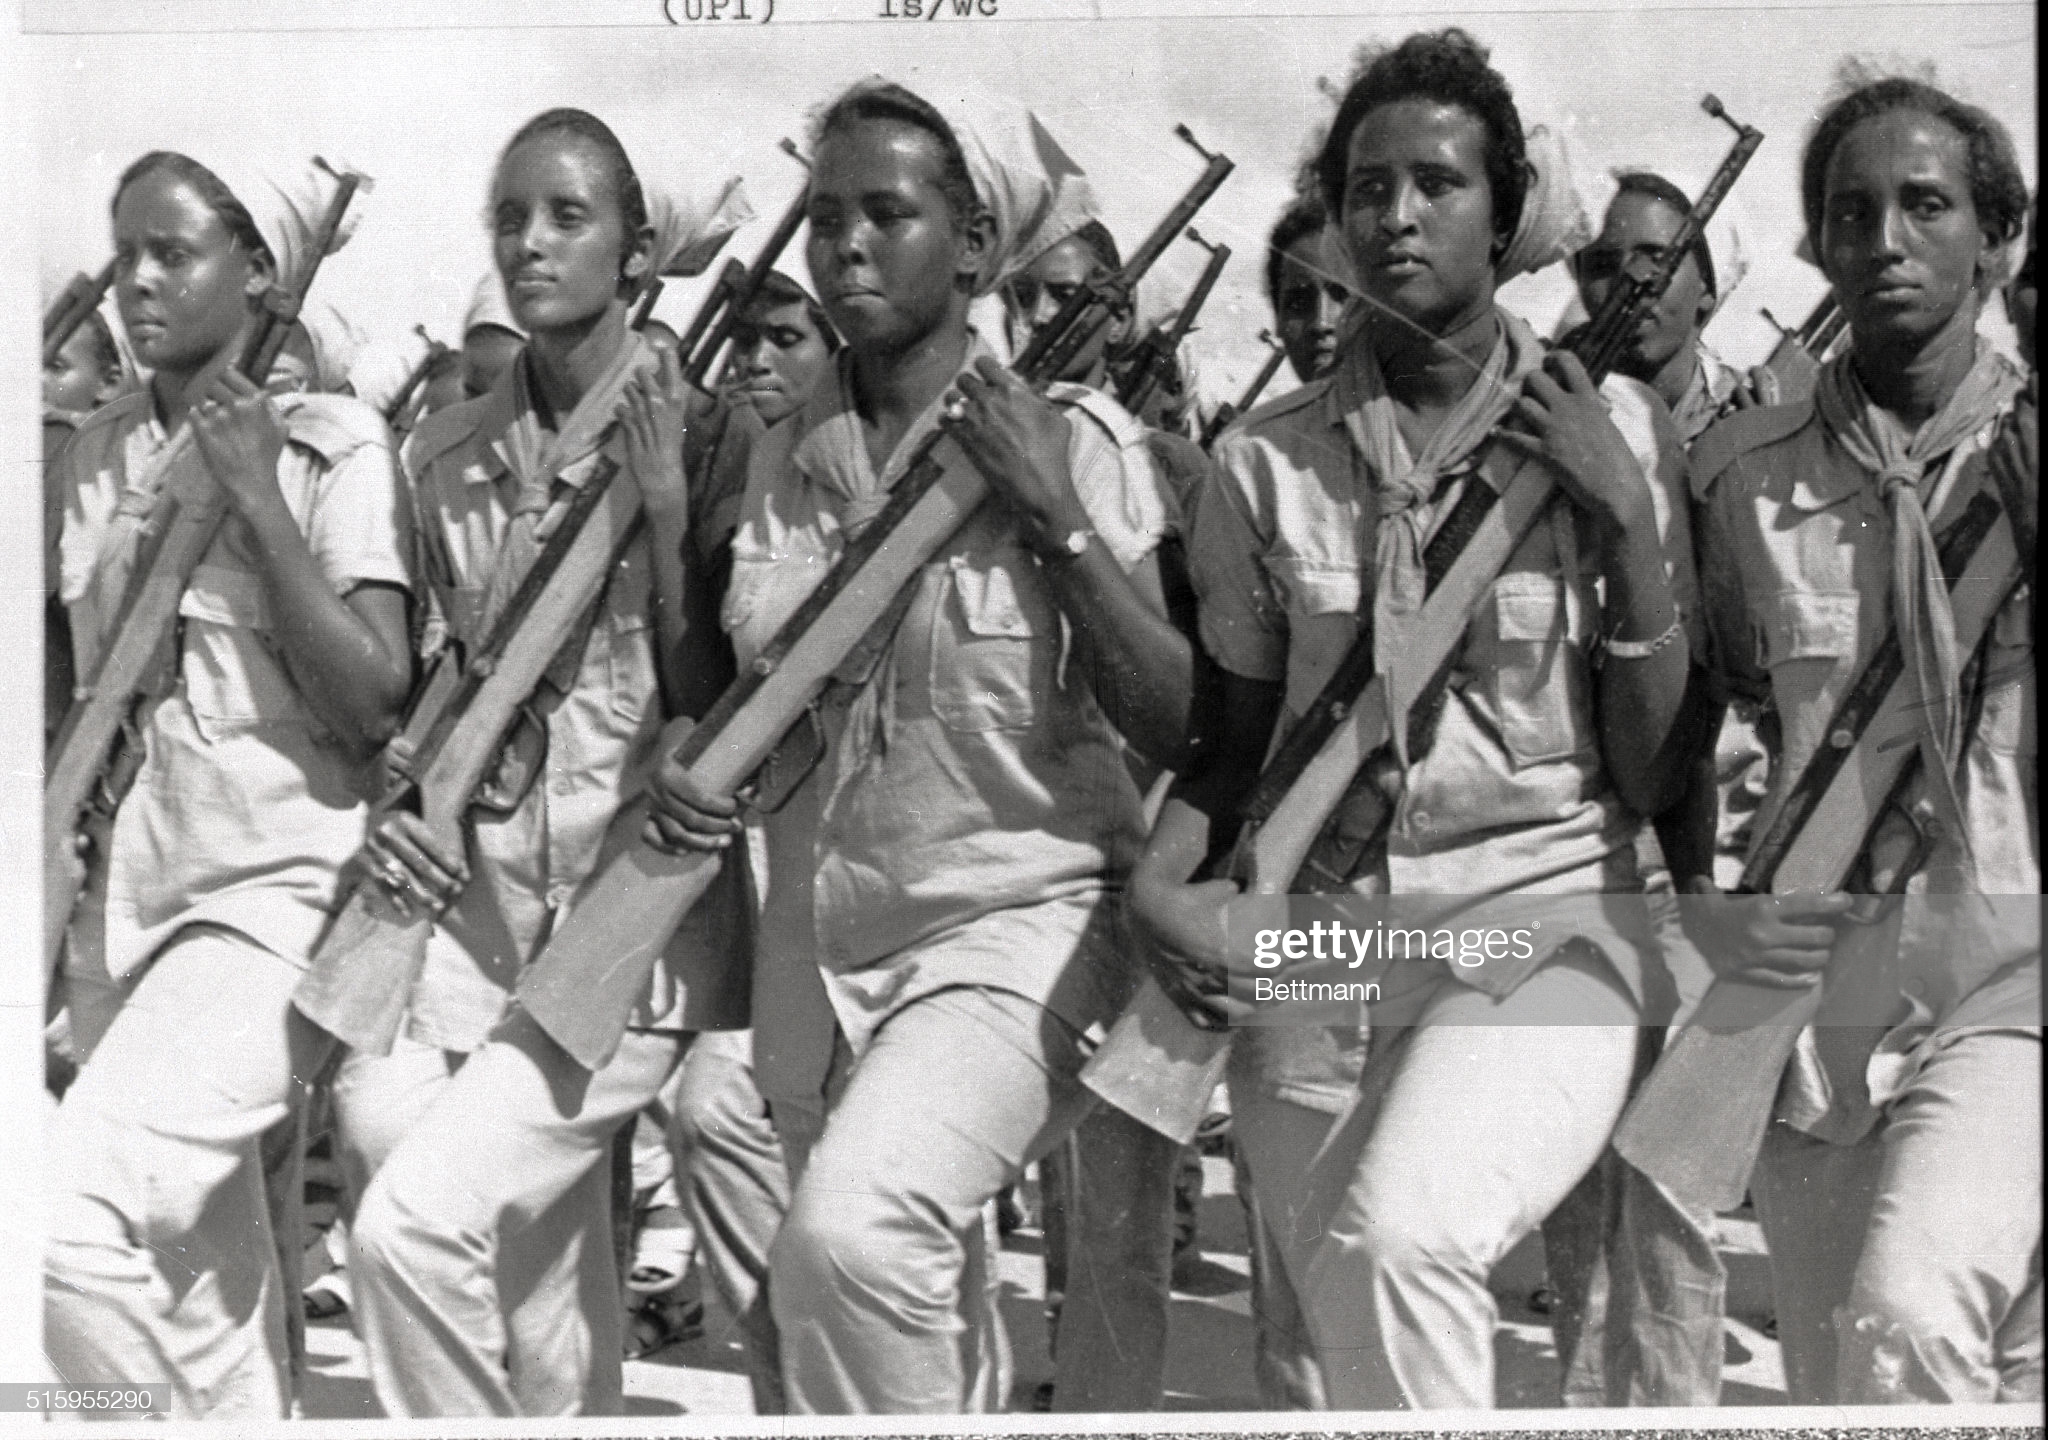 7261977somalia-somali-women-train-with-wooden-rifles-during-a-recent-picture-id515955290s=2048x2048.jpg